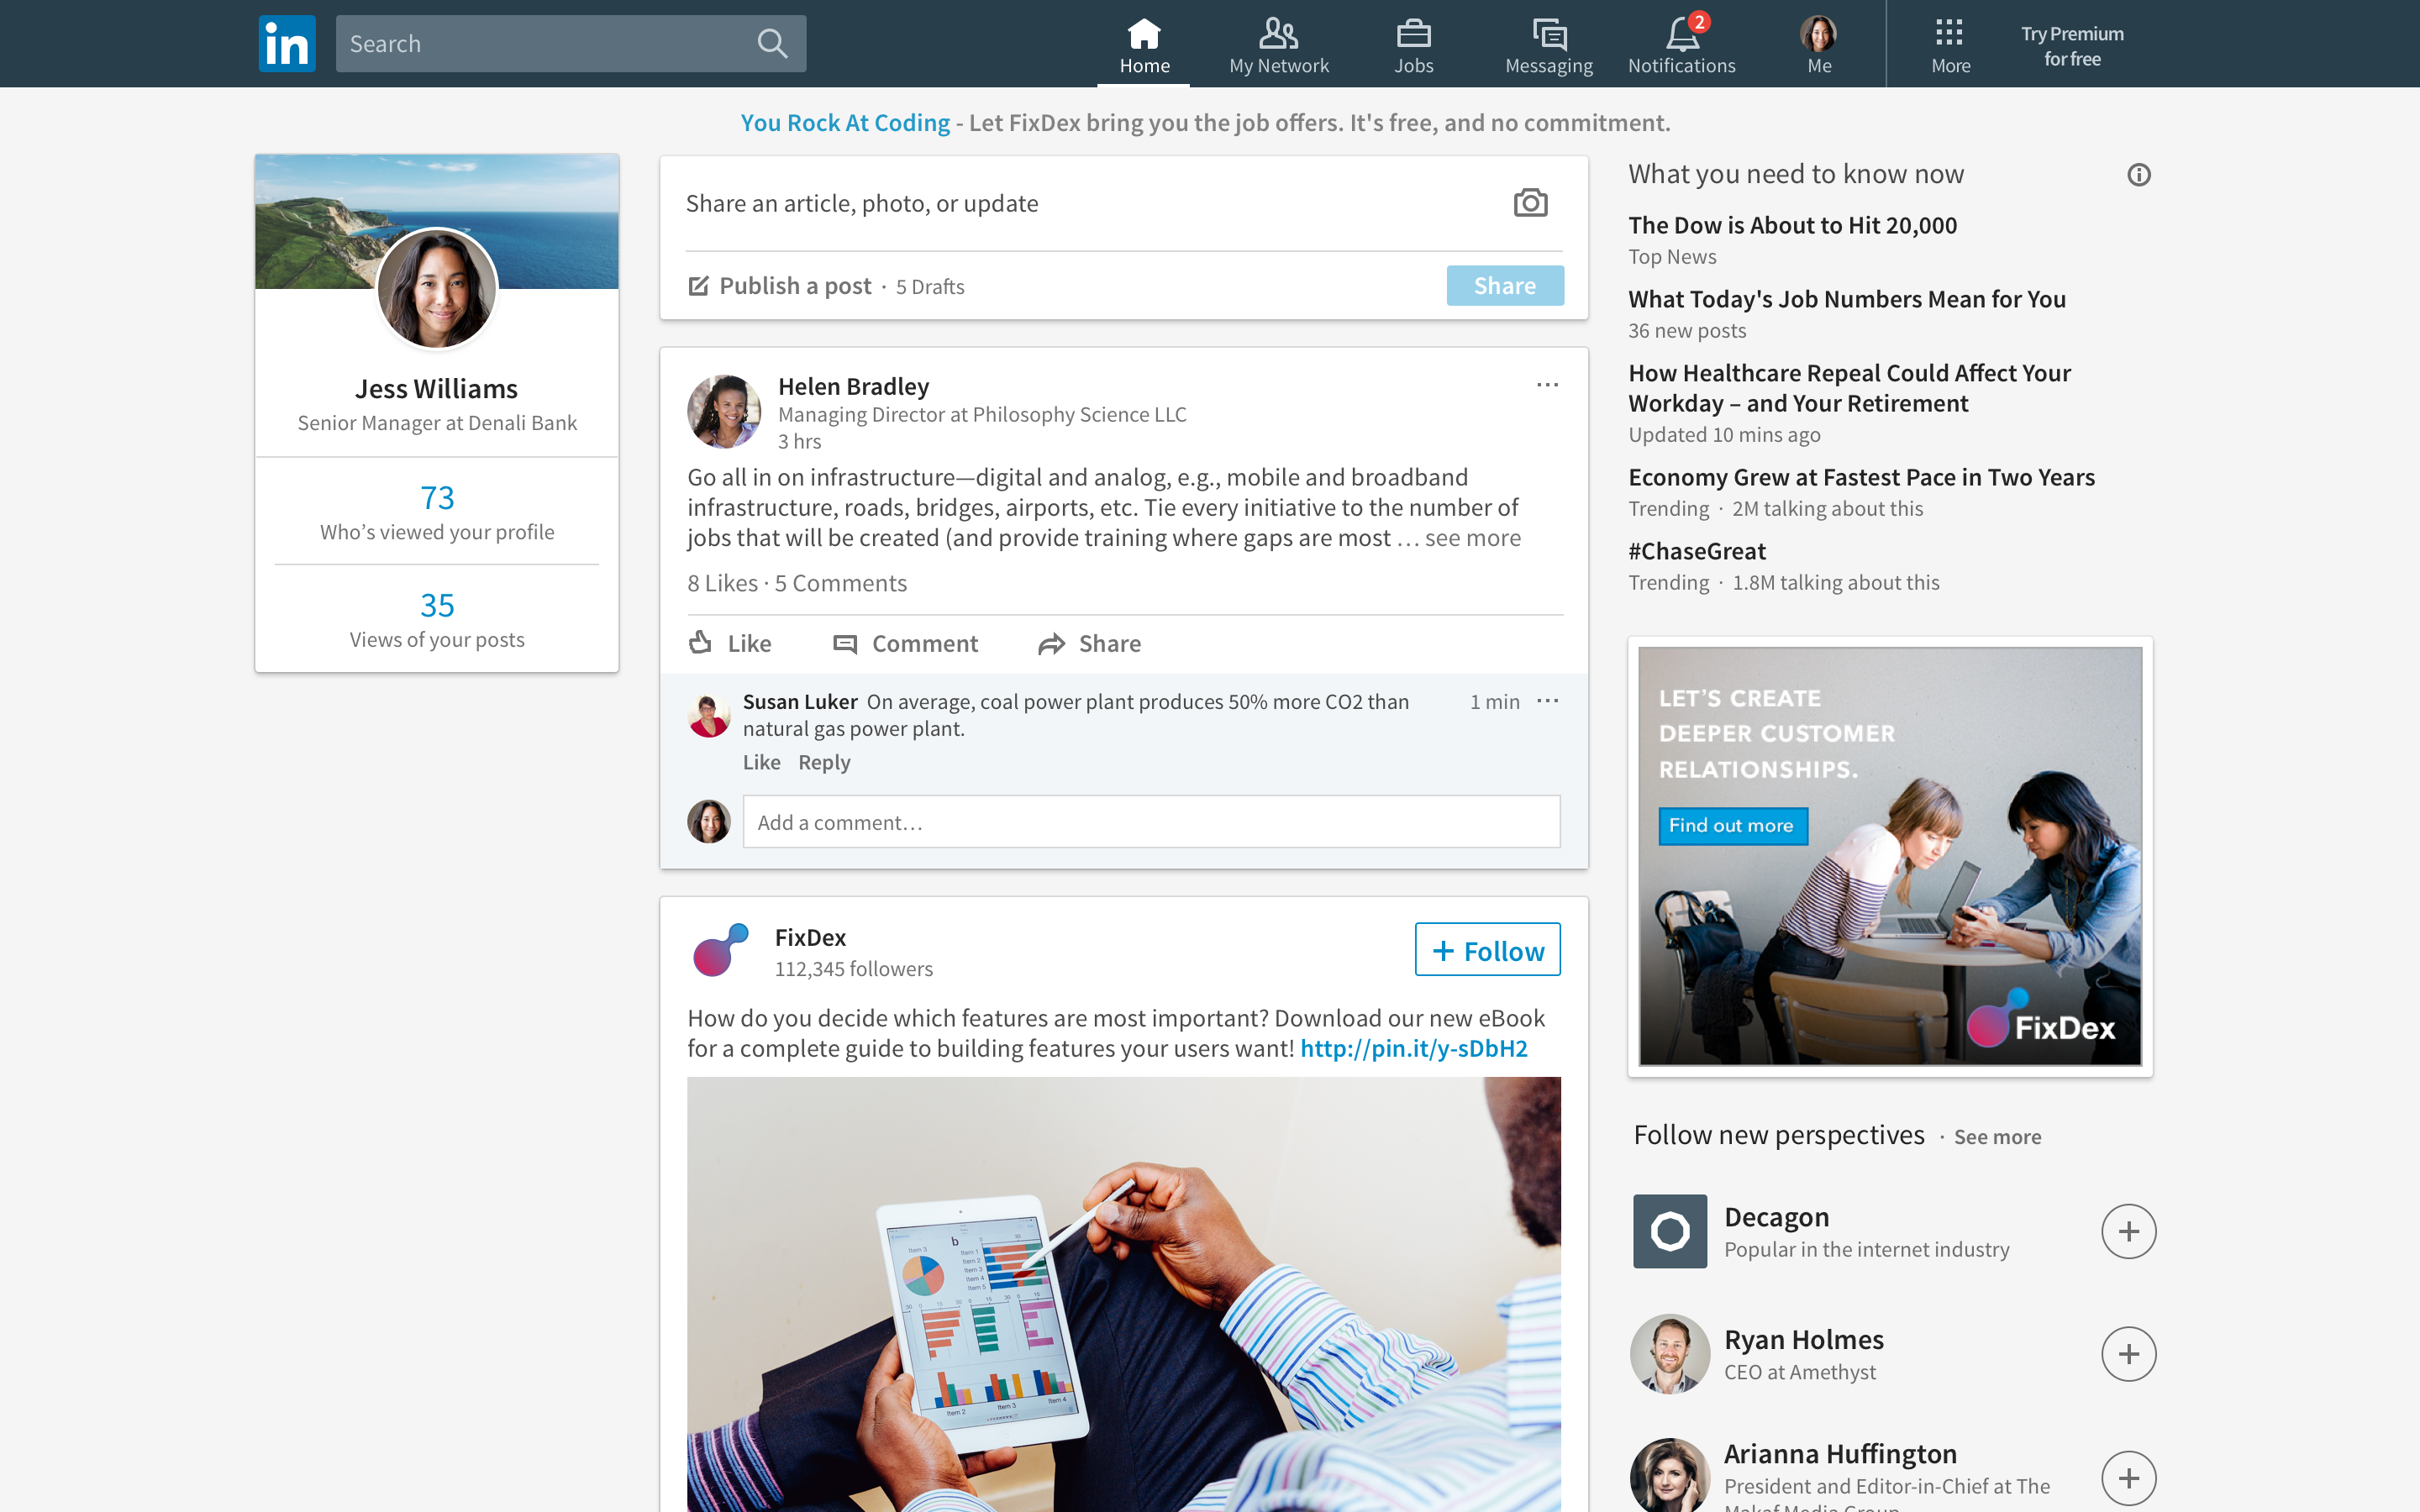 LinkedIn mercifully redesigns its cluttered homepage